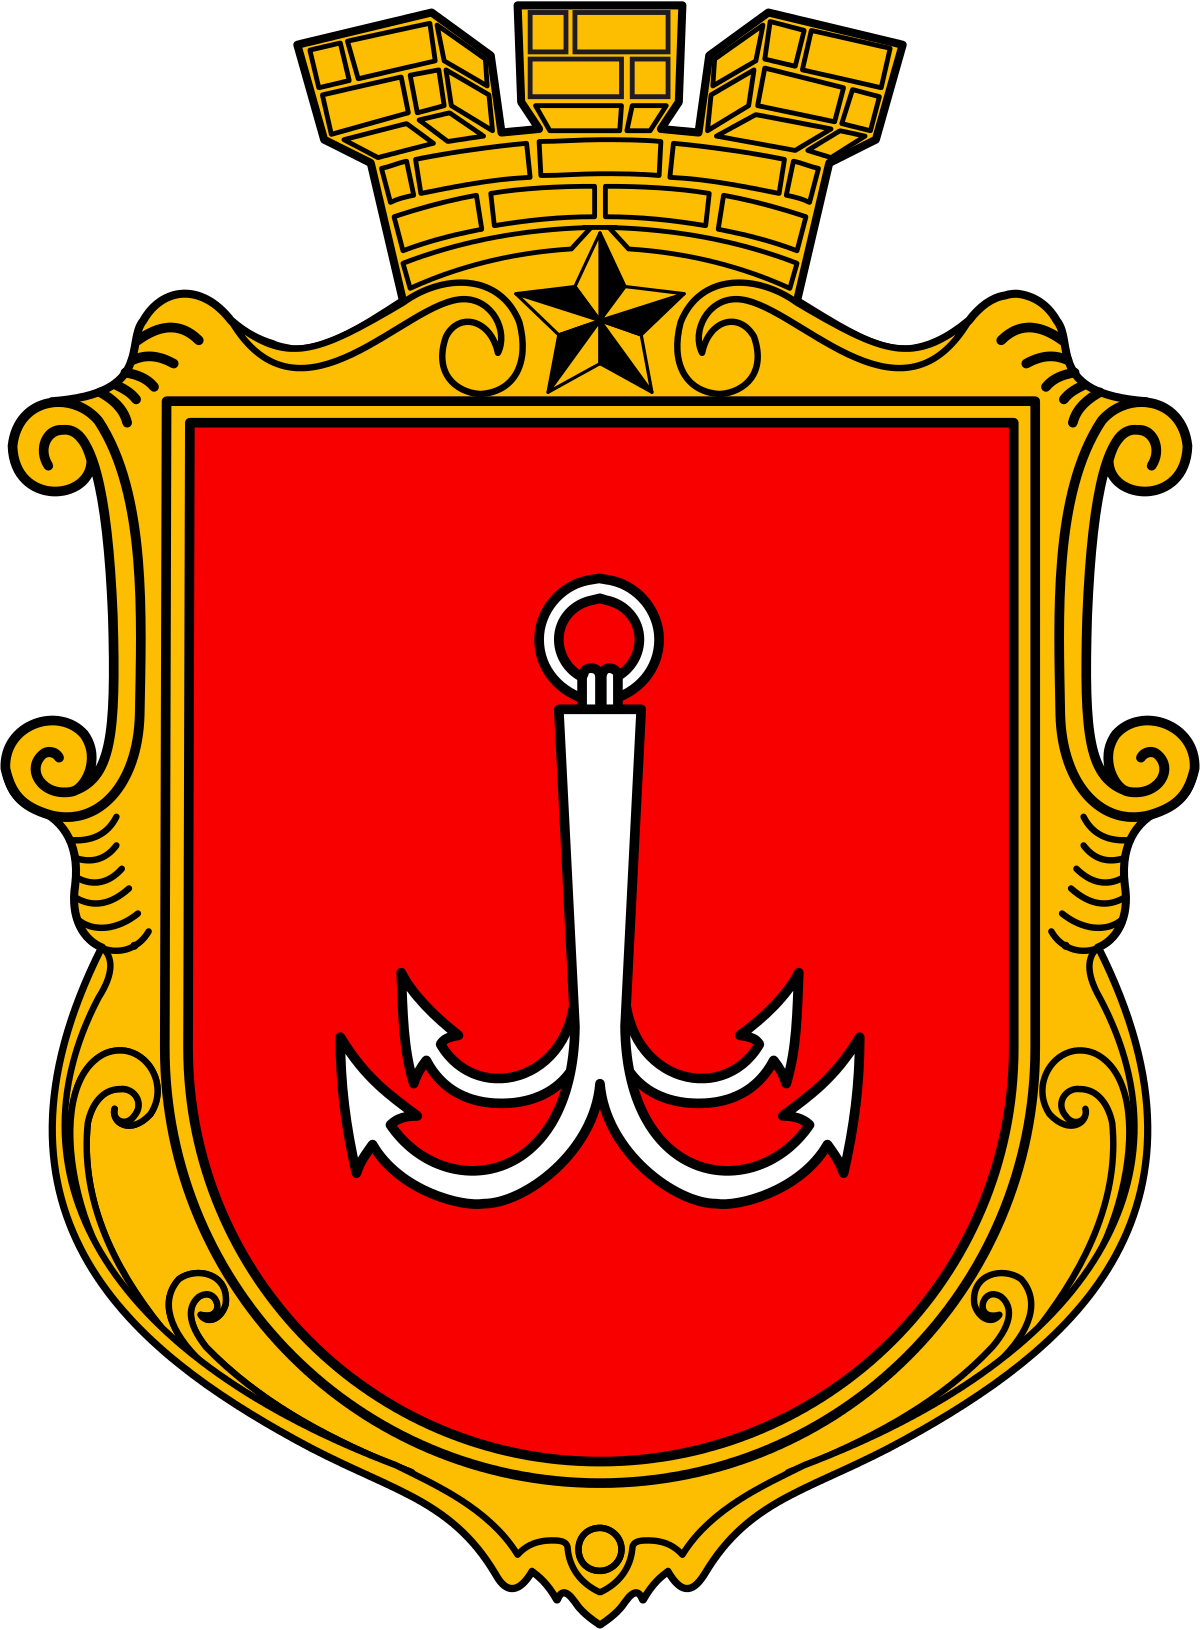 Coat of Arms of Odessa svg